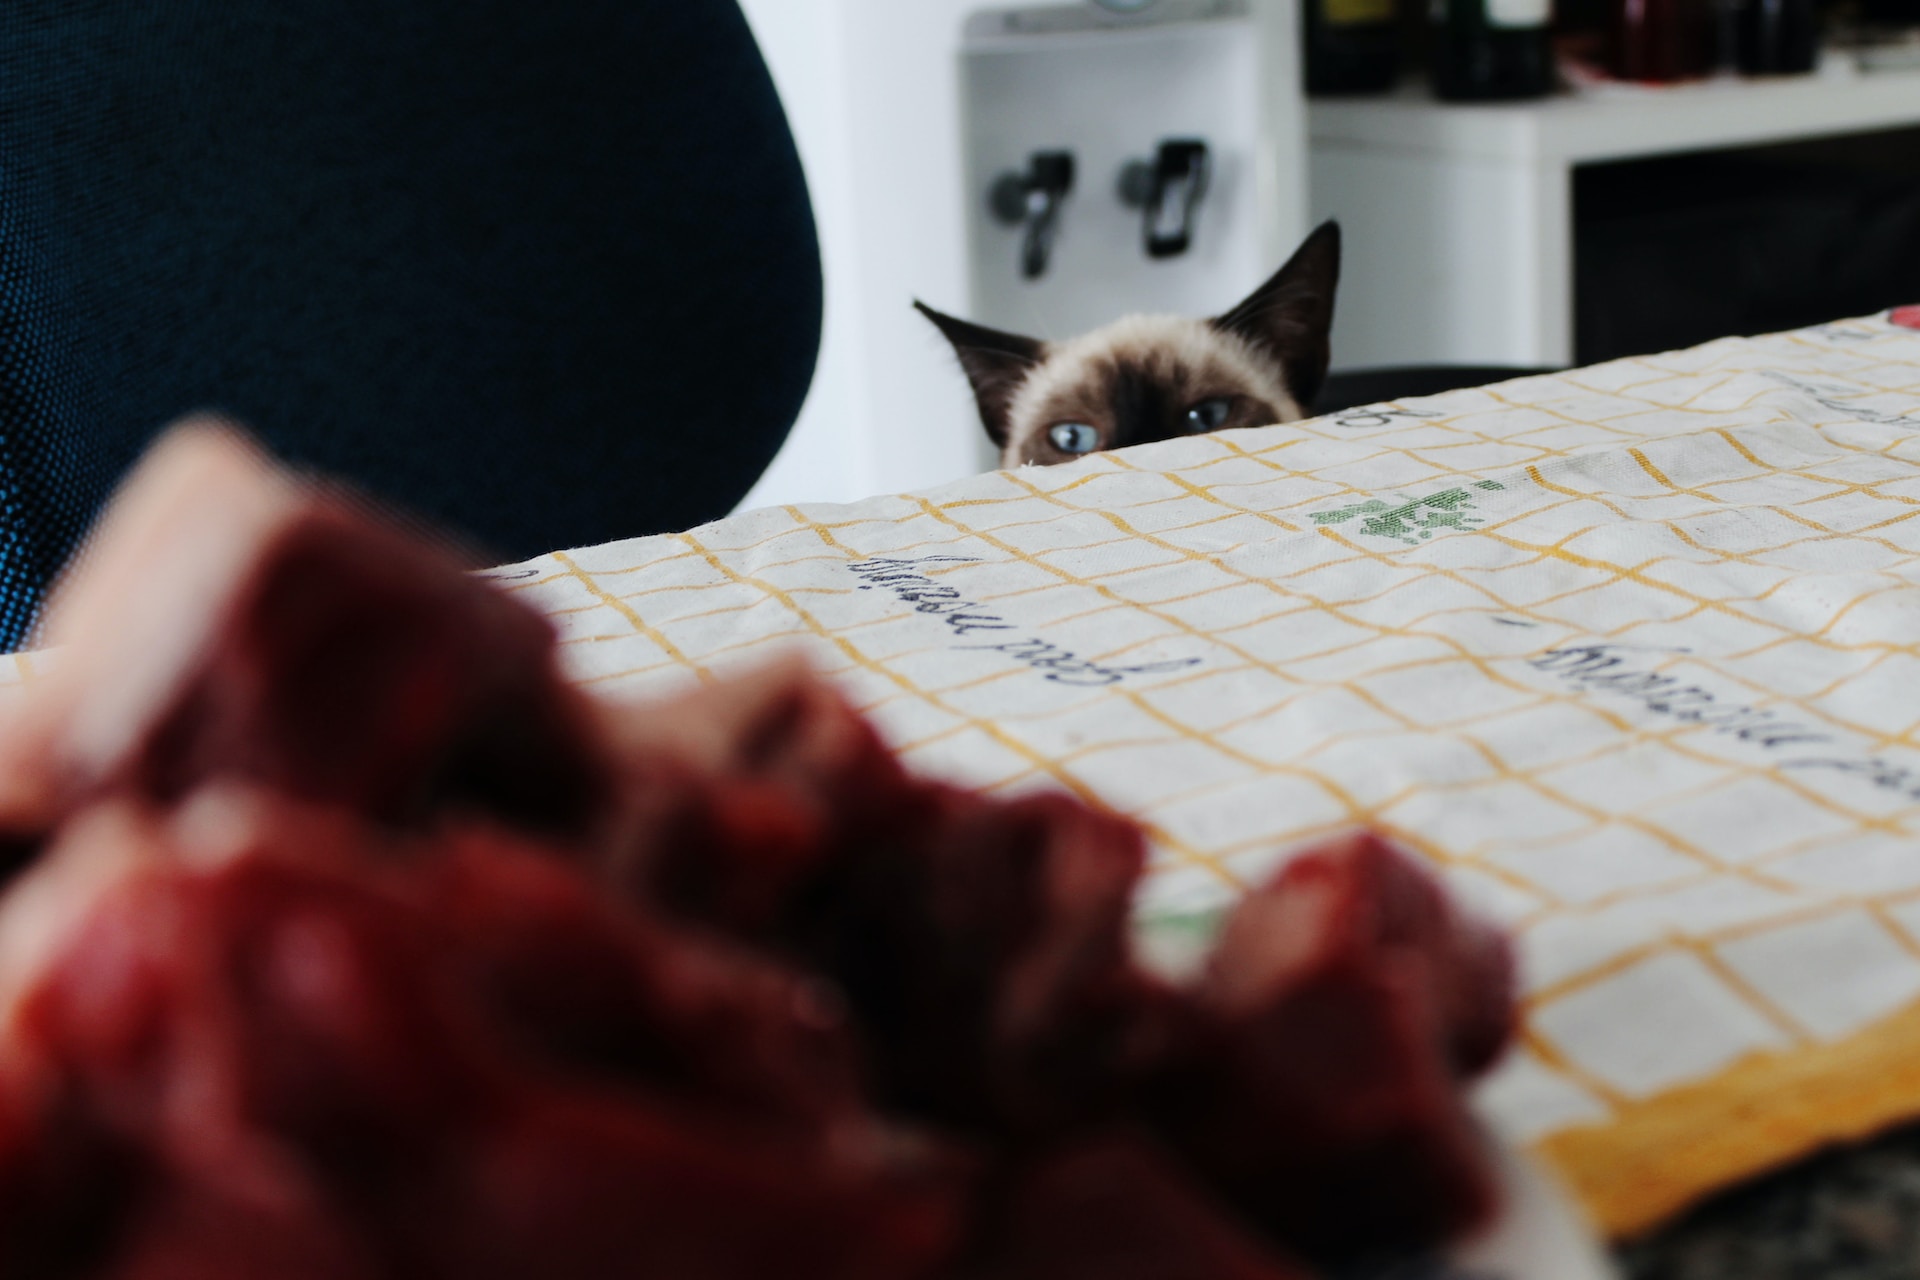 A cat sneaking a glance at raw deli meats on a table